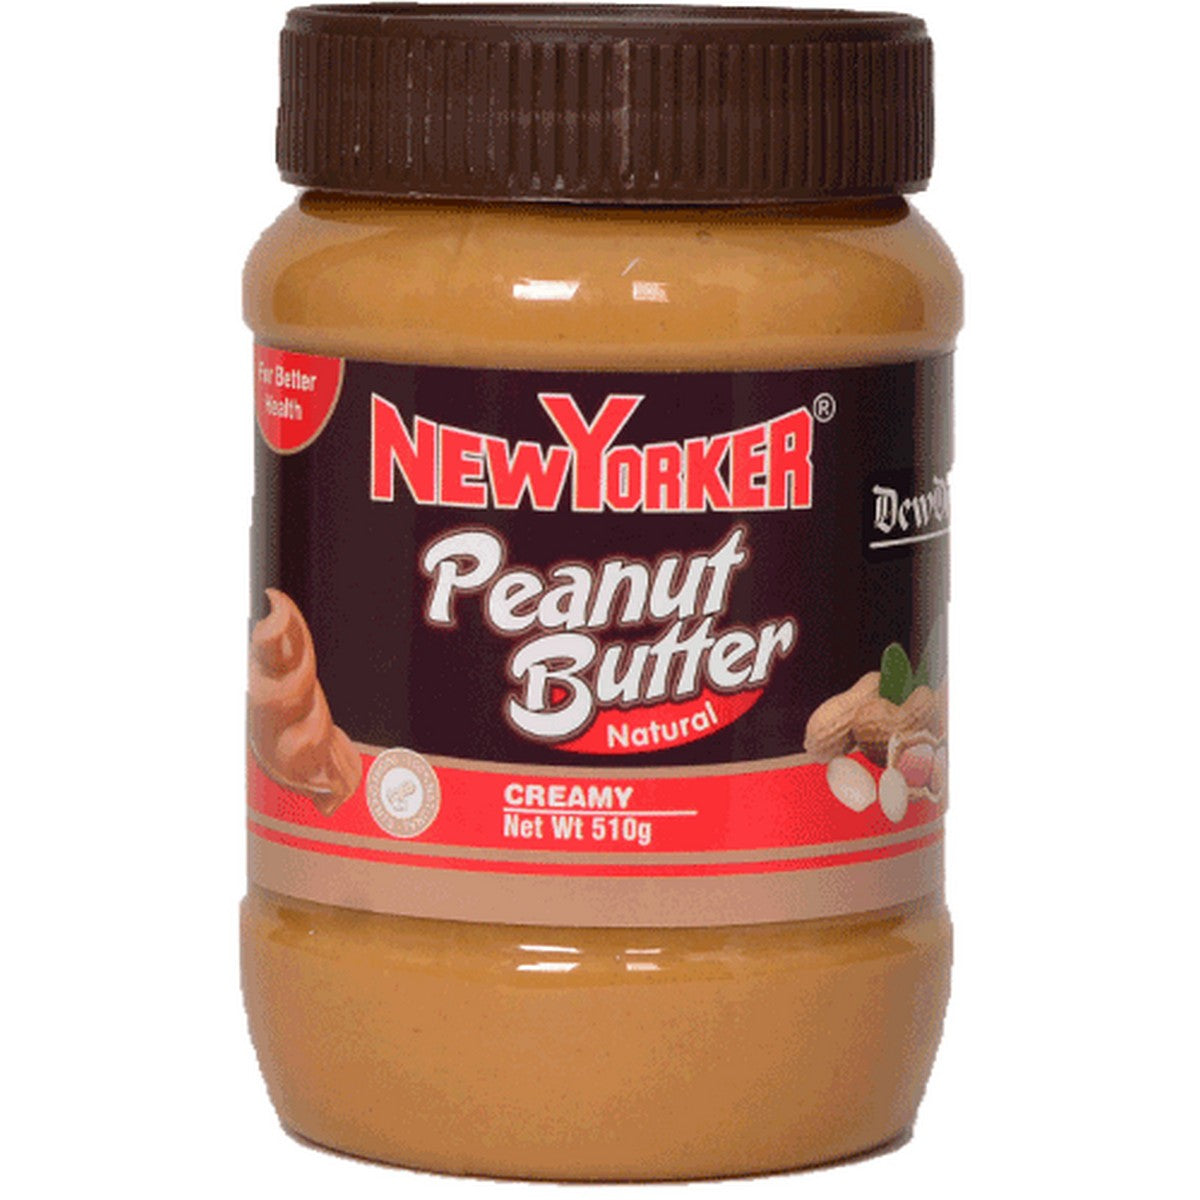 New Yorker - Peanut Butter - 510g - Creamy - Pack Of 12